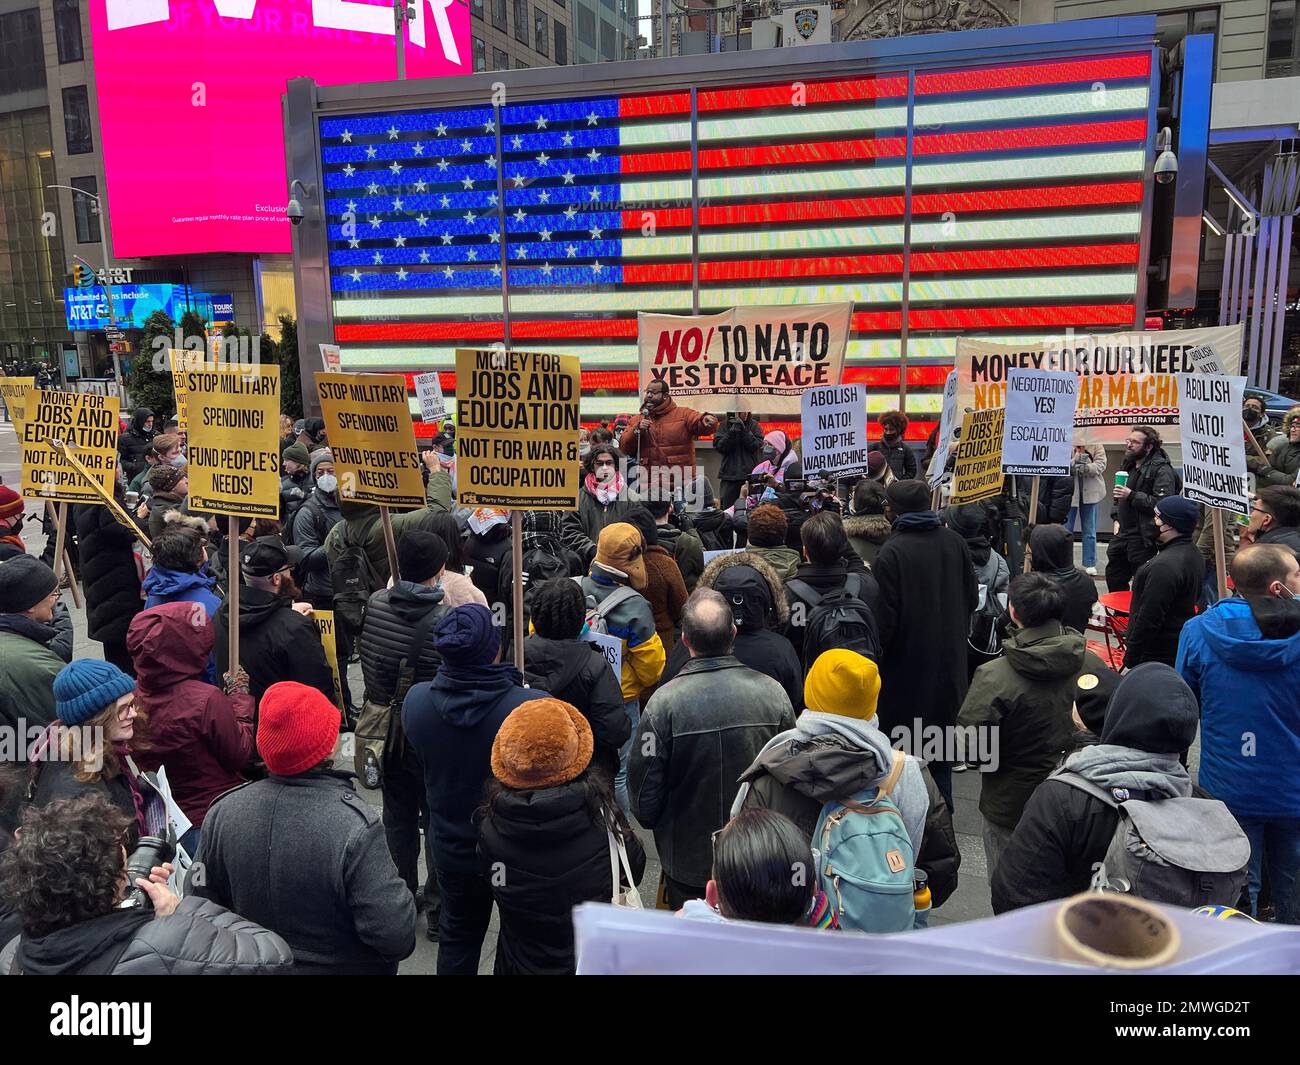 Peace activists and anti-militarists looking for negotiations in Ukraine rather than NATO escelating the war rally in Times Square by the military recruitment center in New York CIty during Martin Luther King Day weekend. Stock Photo